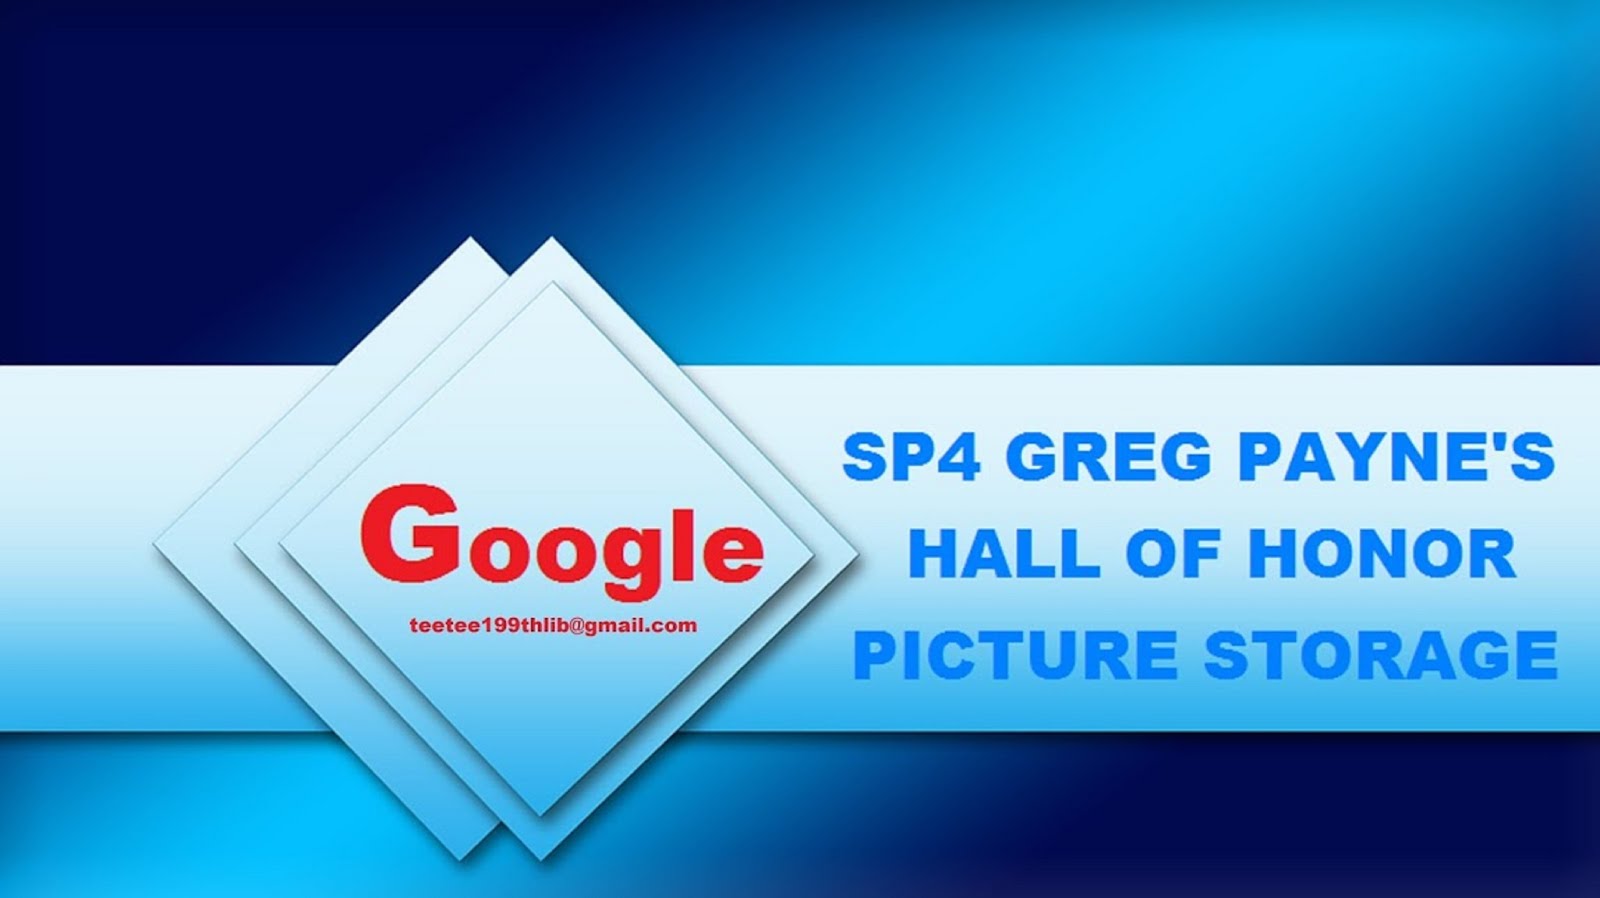 SP4 GREG PAYNE'S HALL OF HONOR PICTURE STORAGE